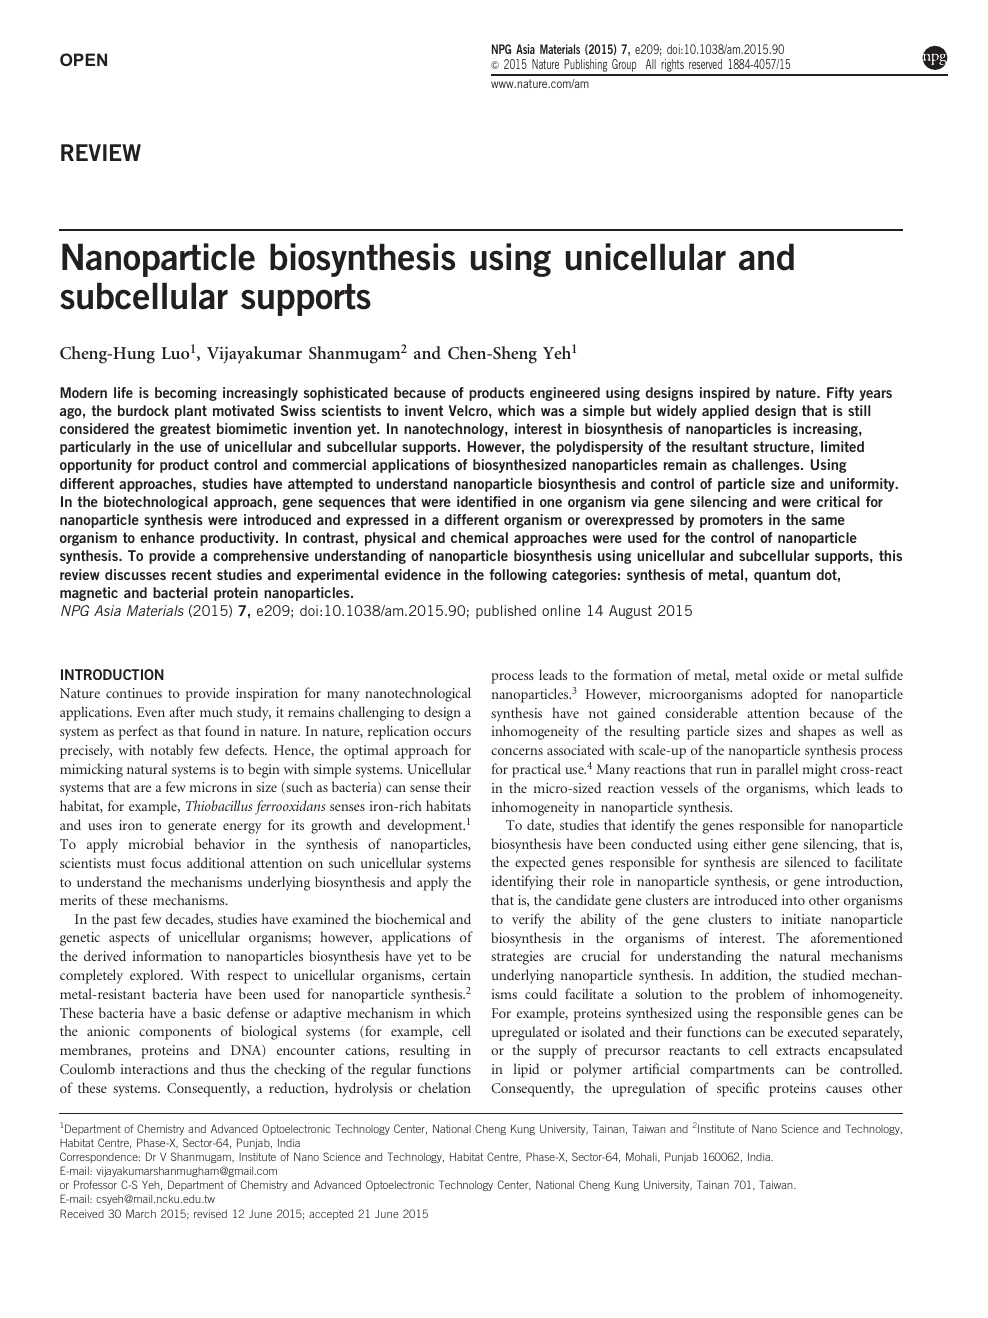 Nanoparticle biosynthesis using unicellular and subcellular 